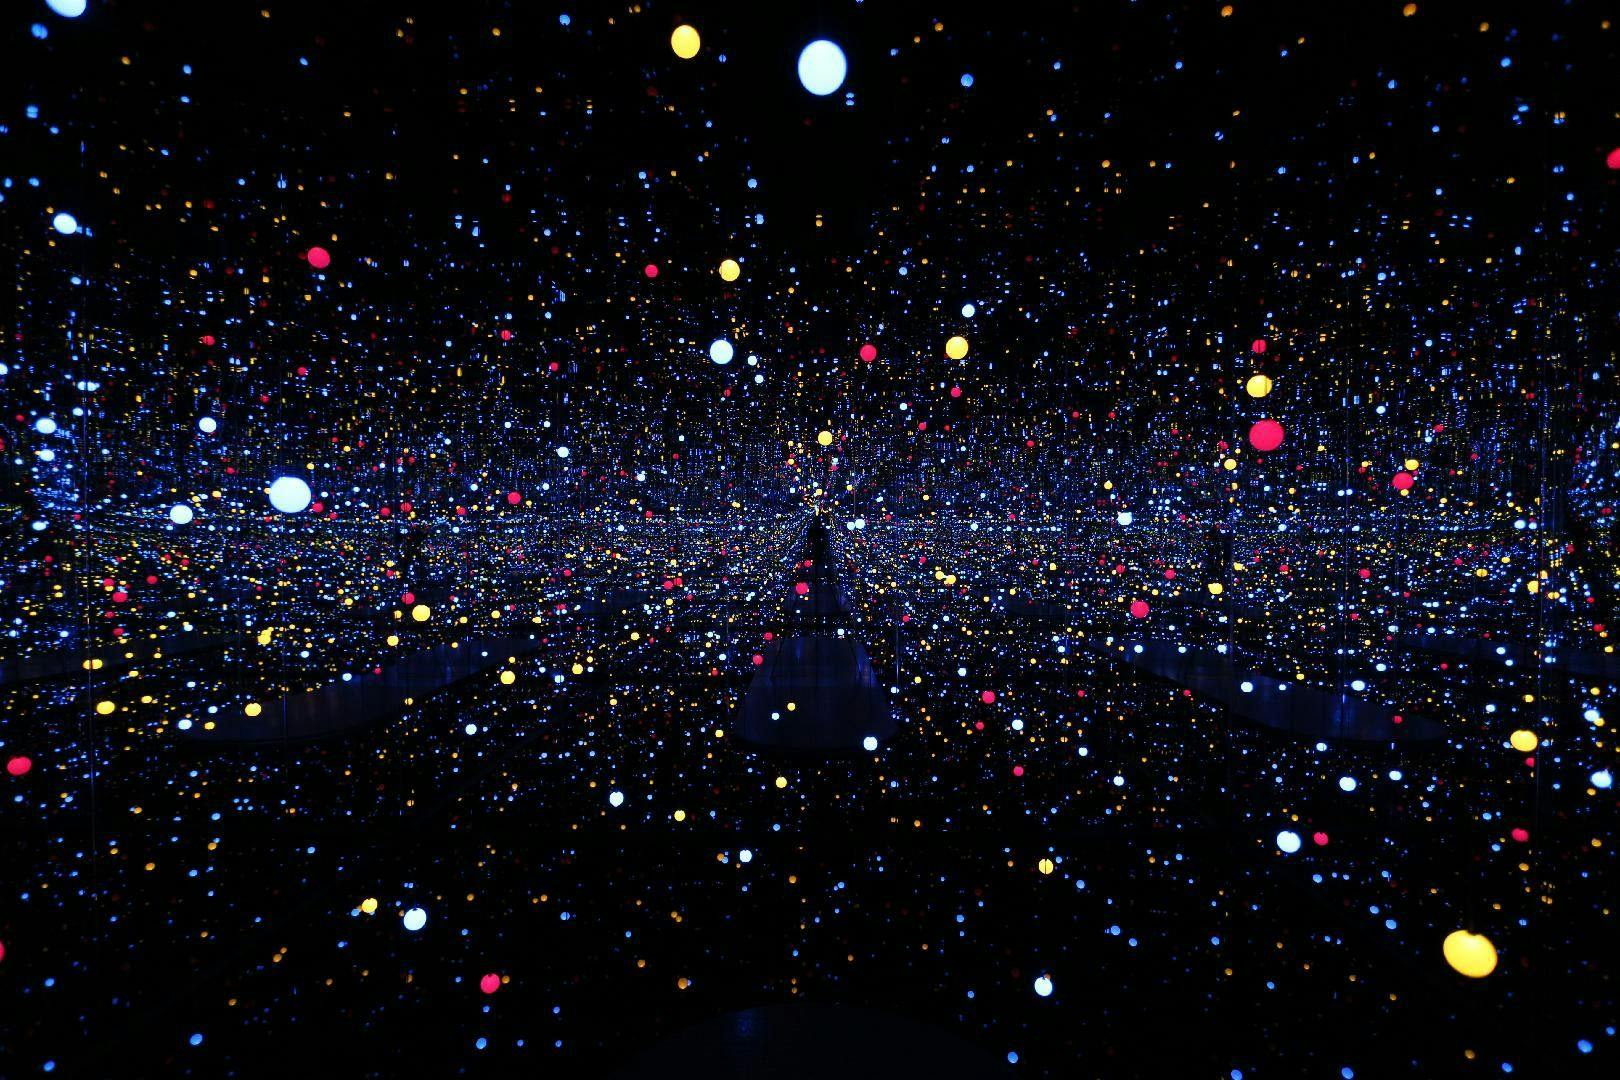 An installation by Yayoi Kusama, titled INFINITY MIRRORED ROOM-GLEAMING LIGHTS OF THE SOULS, dated 2008.